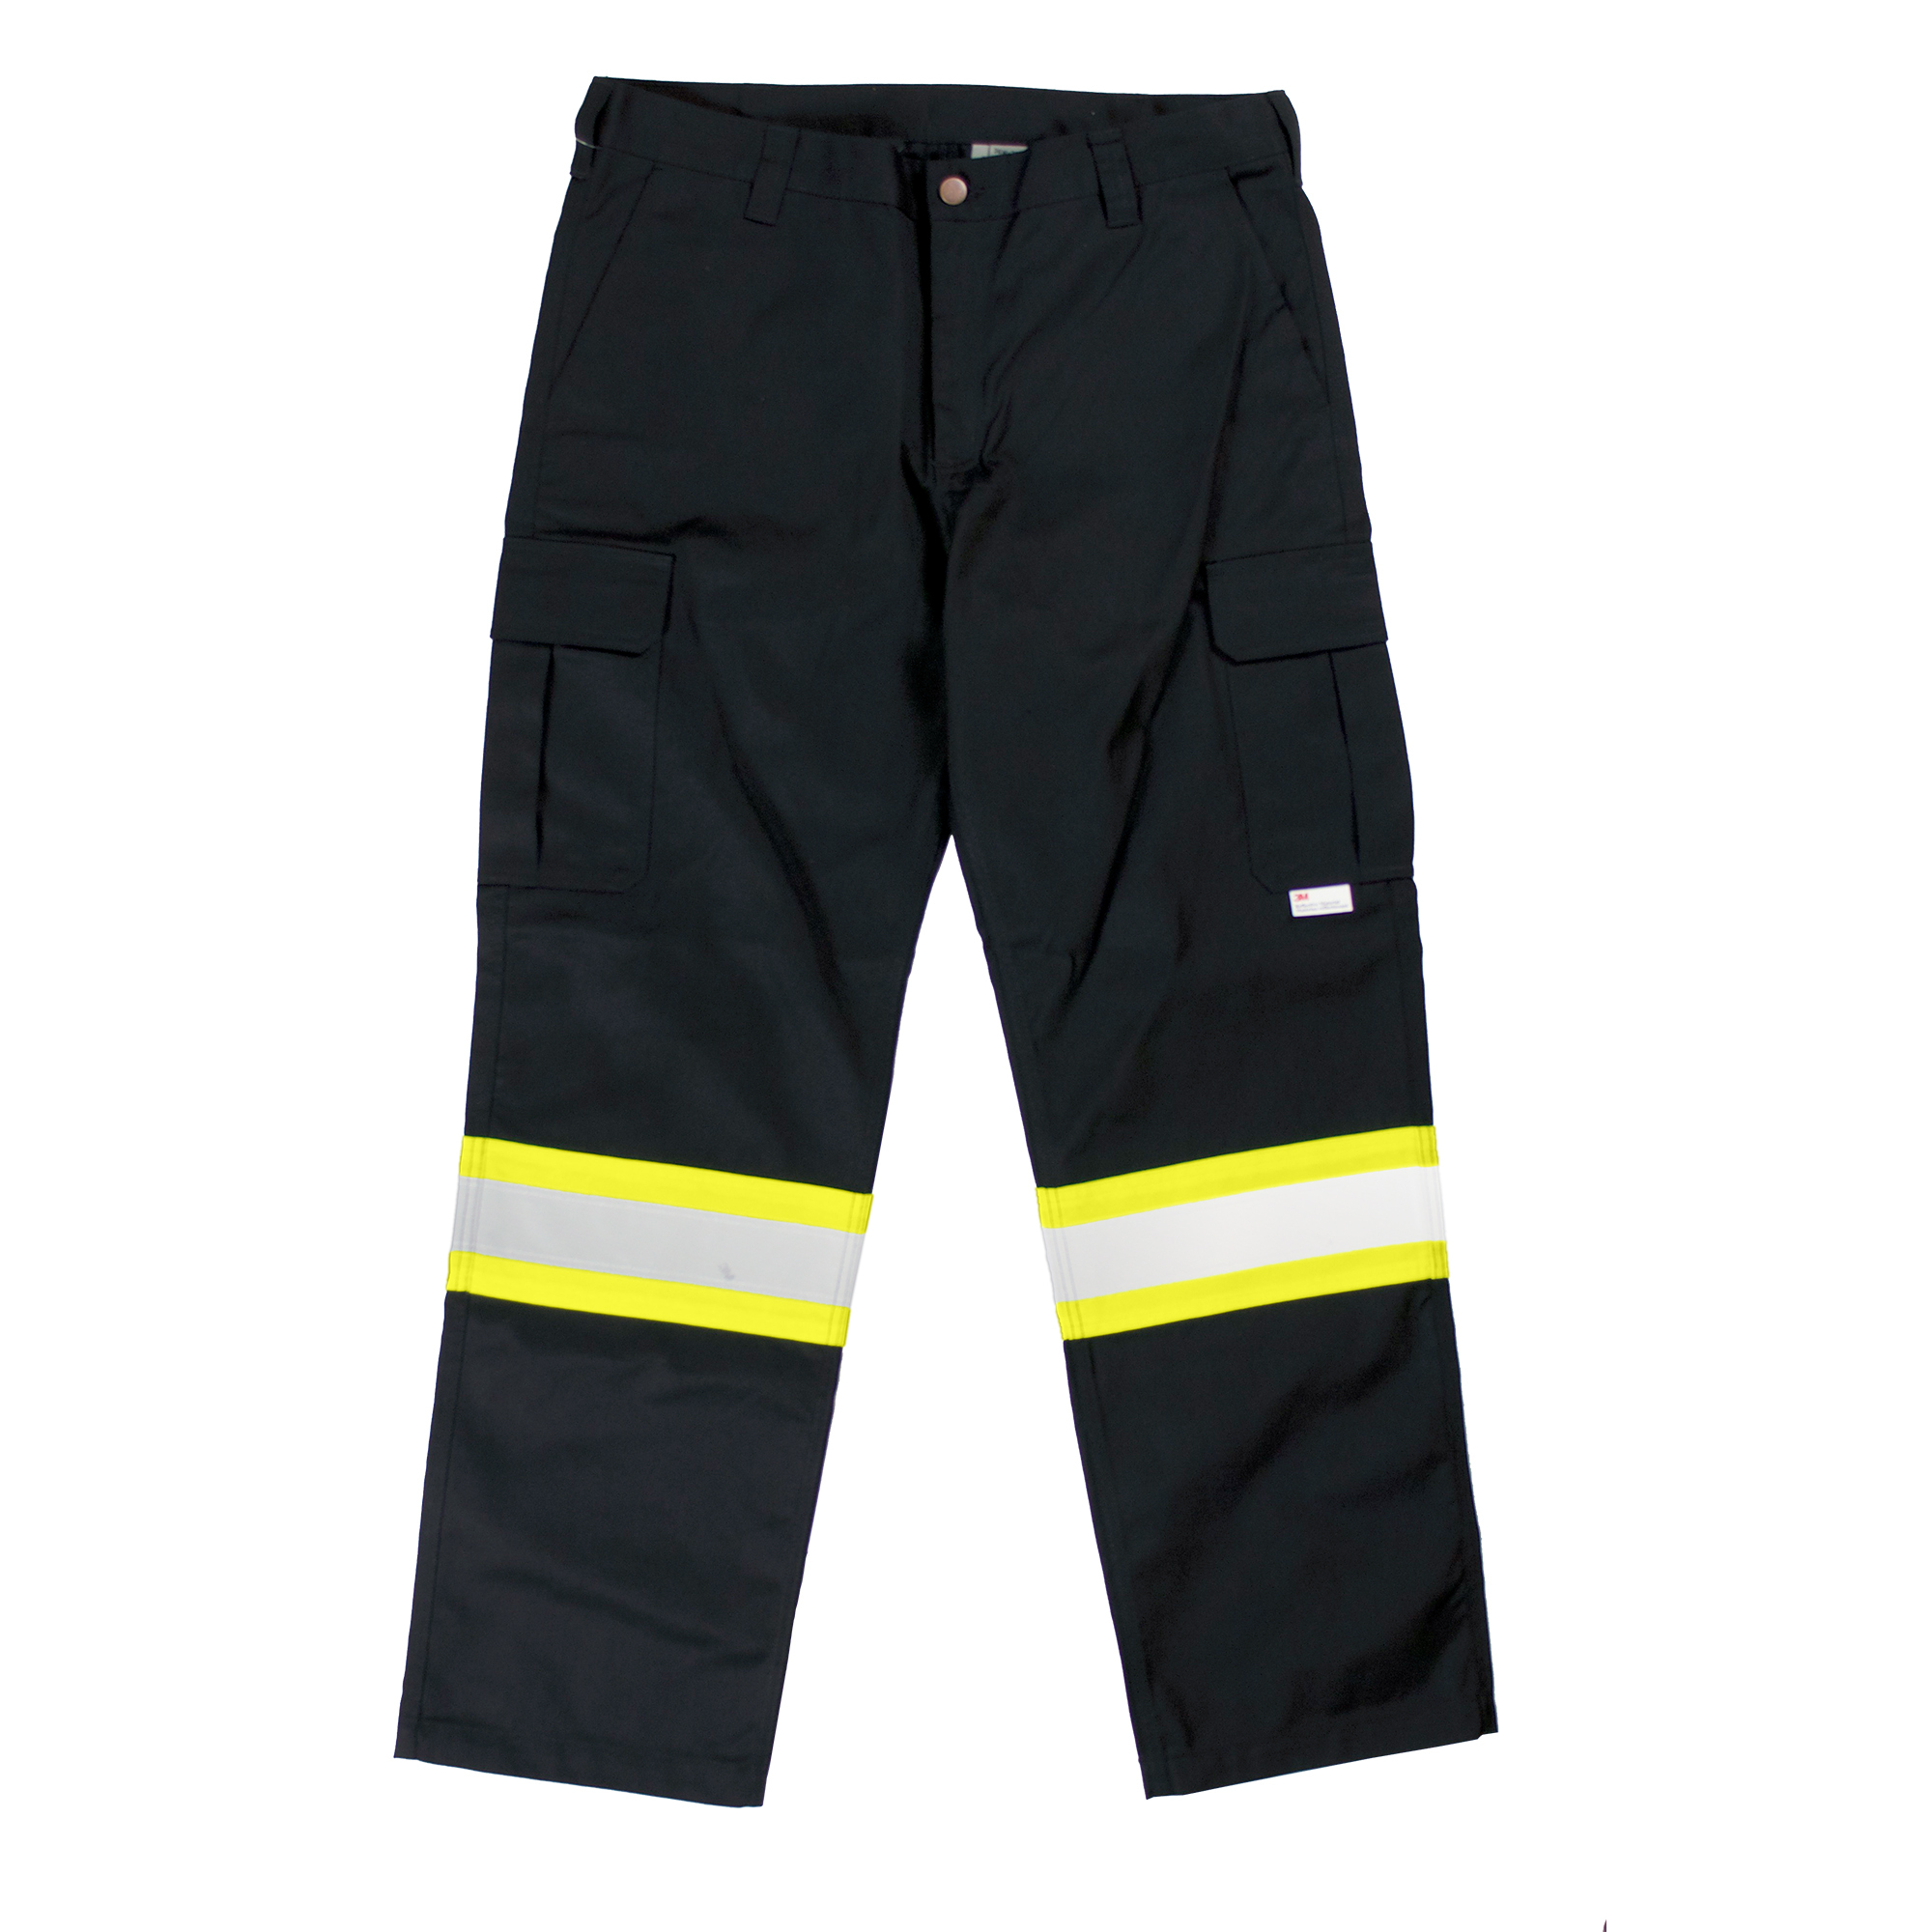 Tough Duck, Safety Cargo Utility Pant, Waist 34 in, Inseam 30 in, Color Black, Model S60701